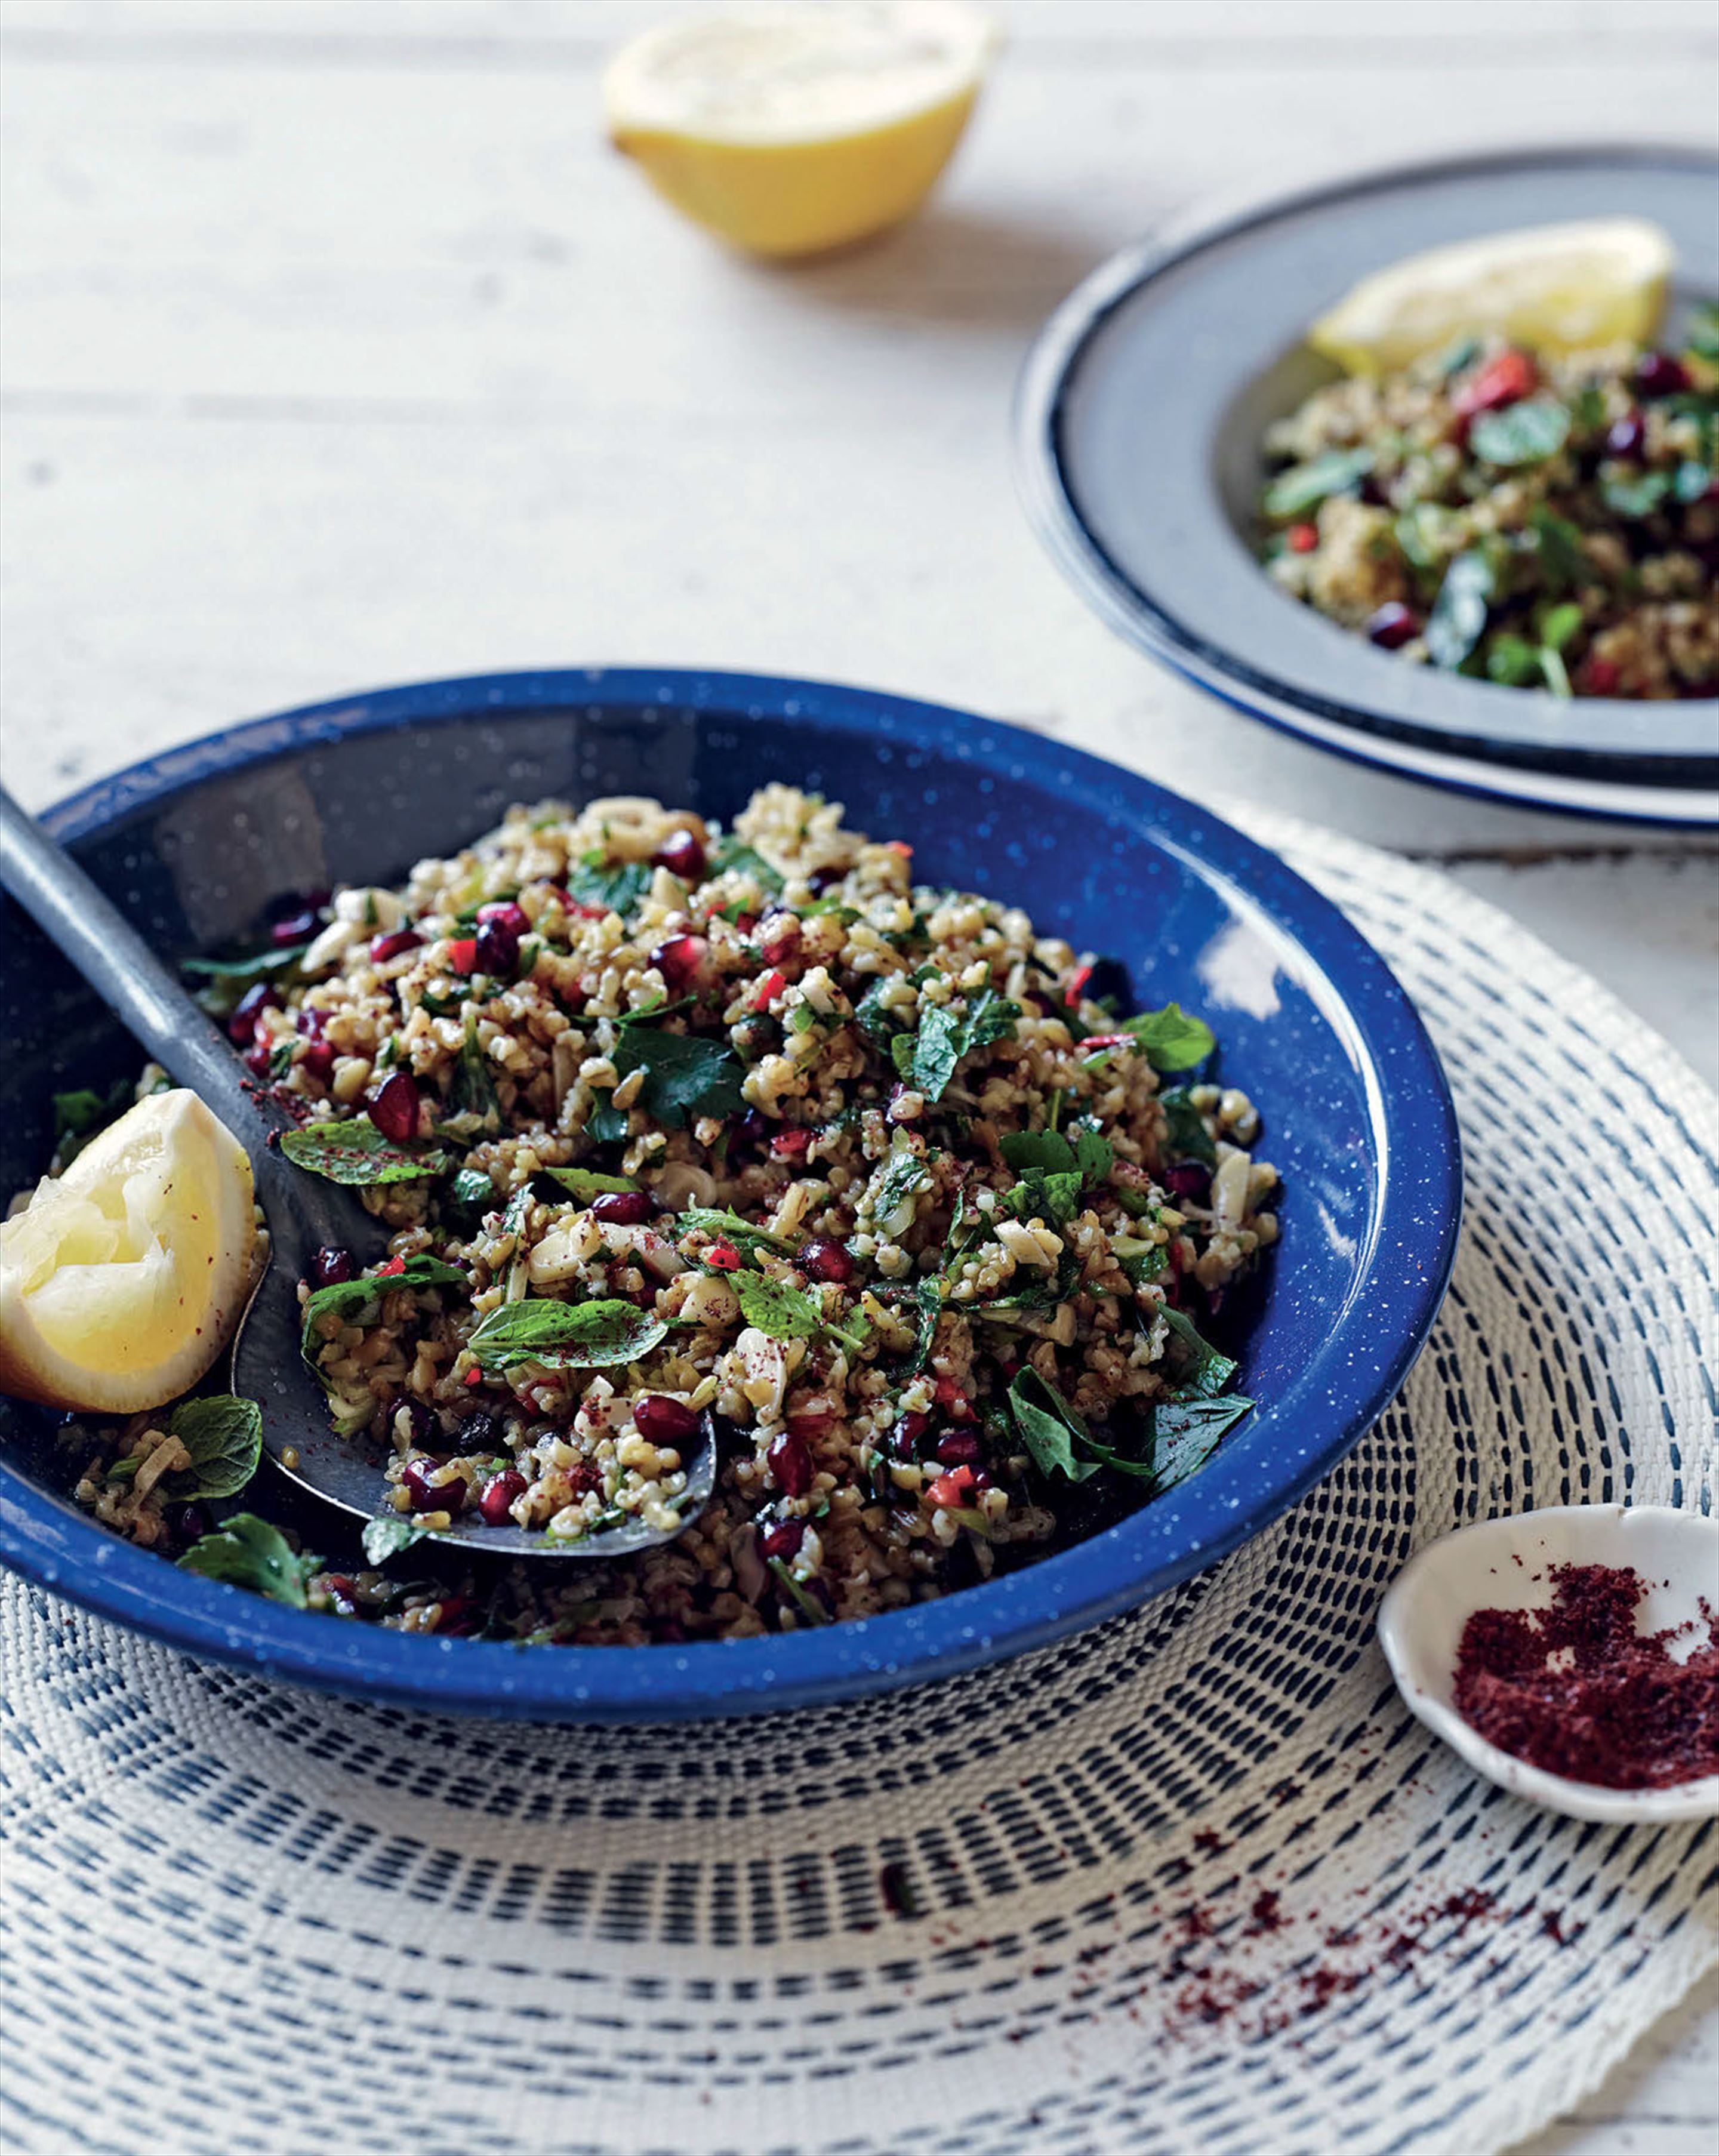 Freekeh salad with almonds and pomegranate